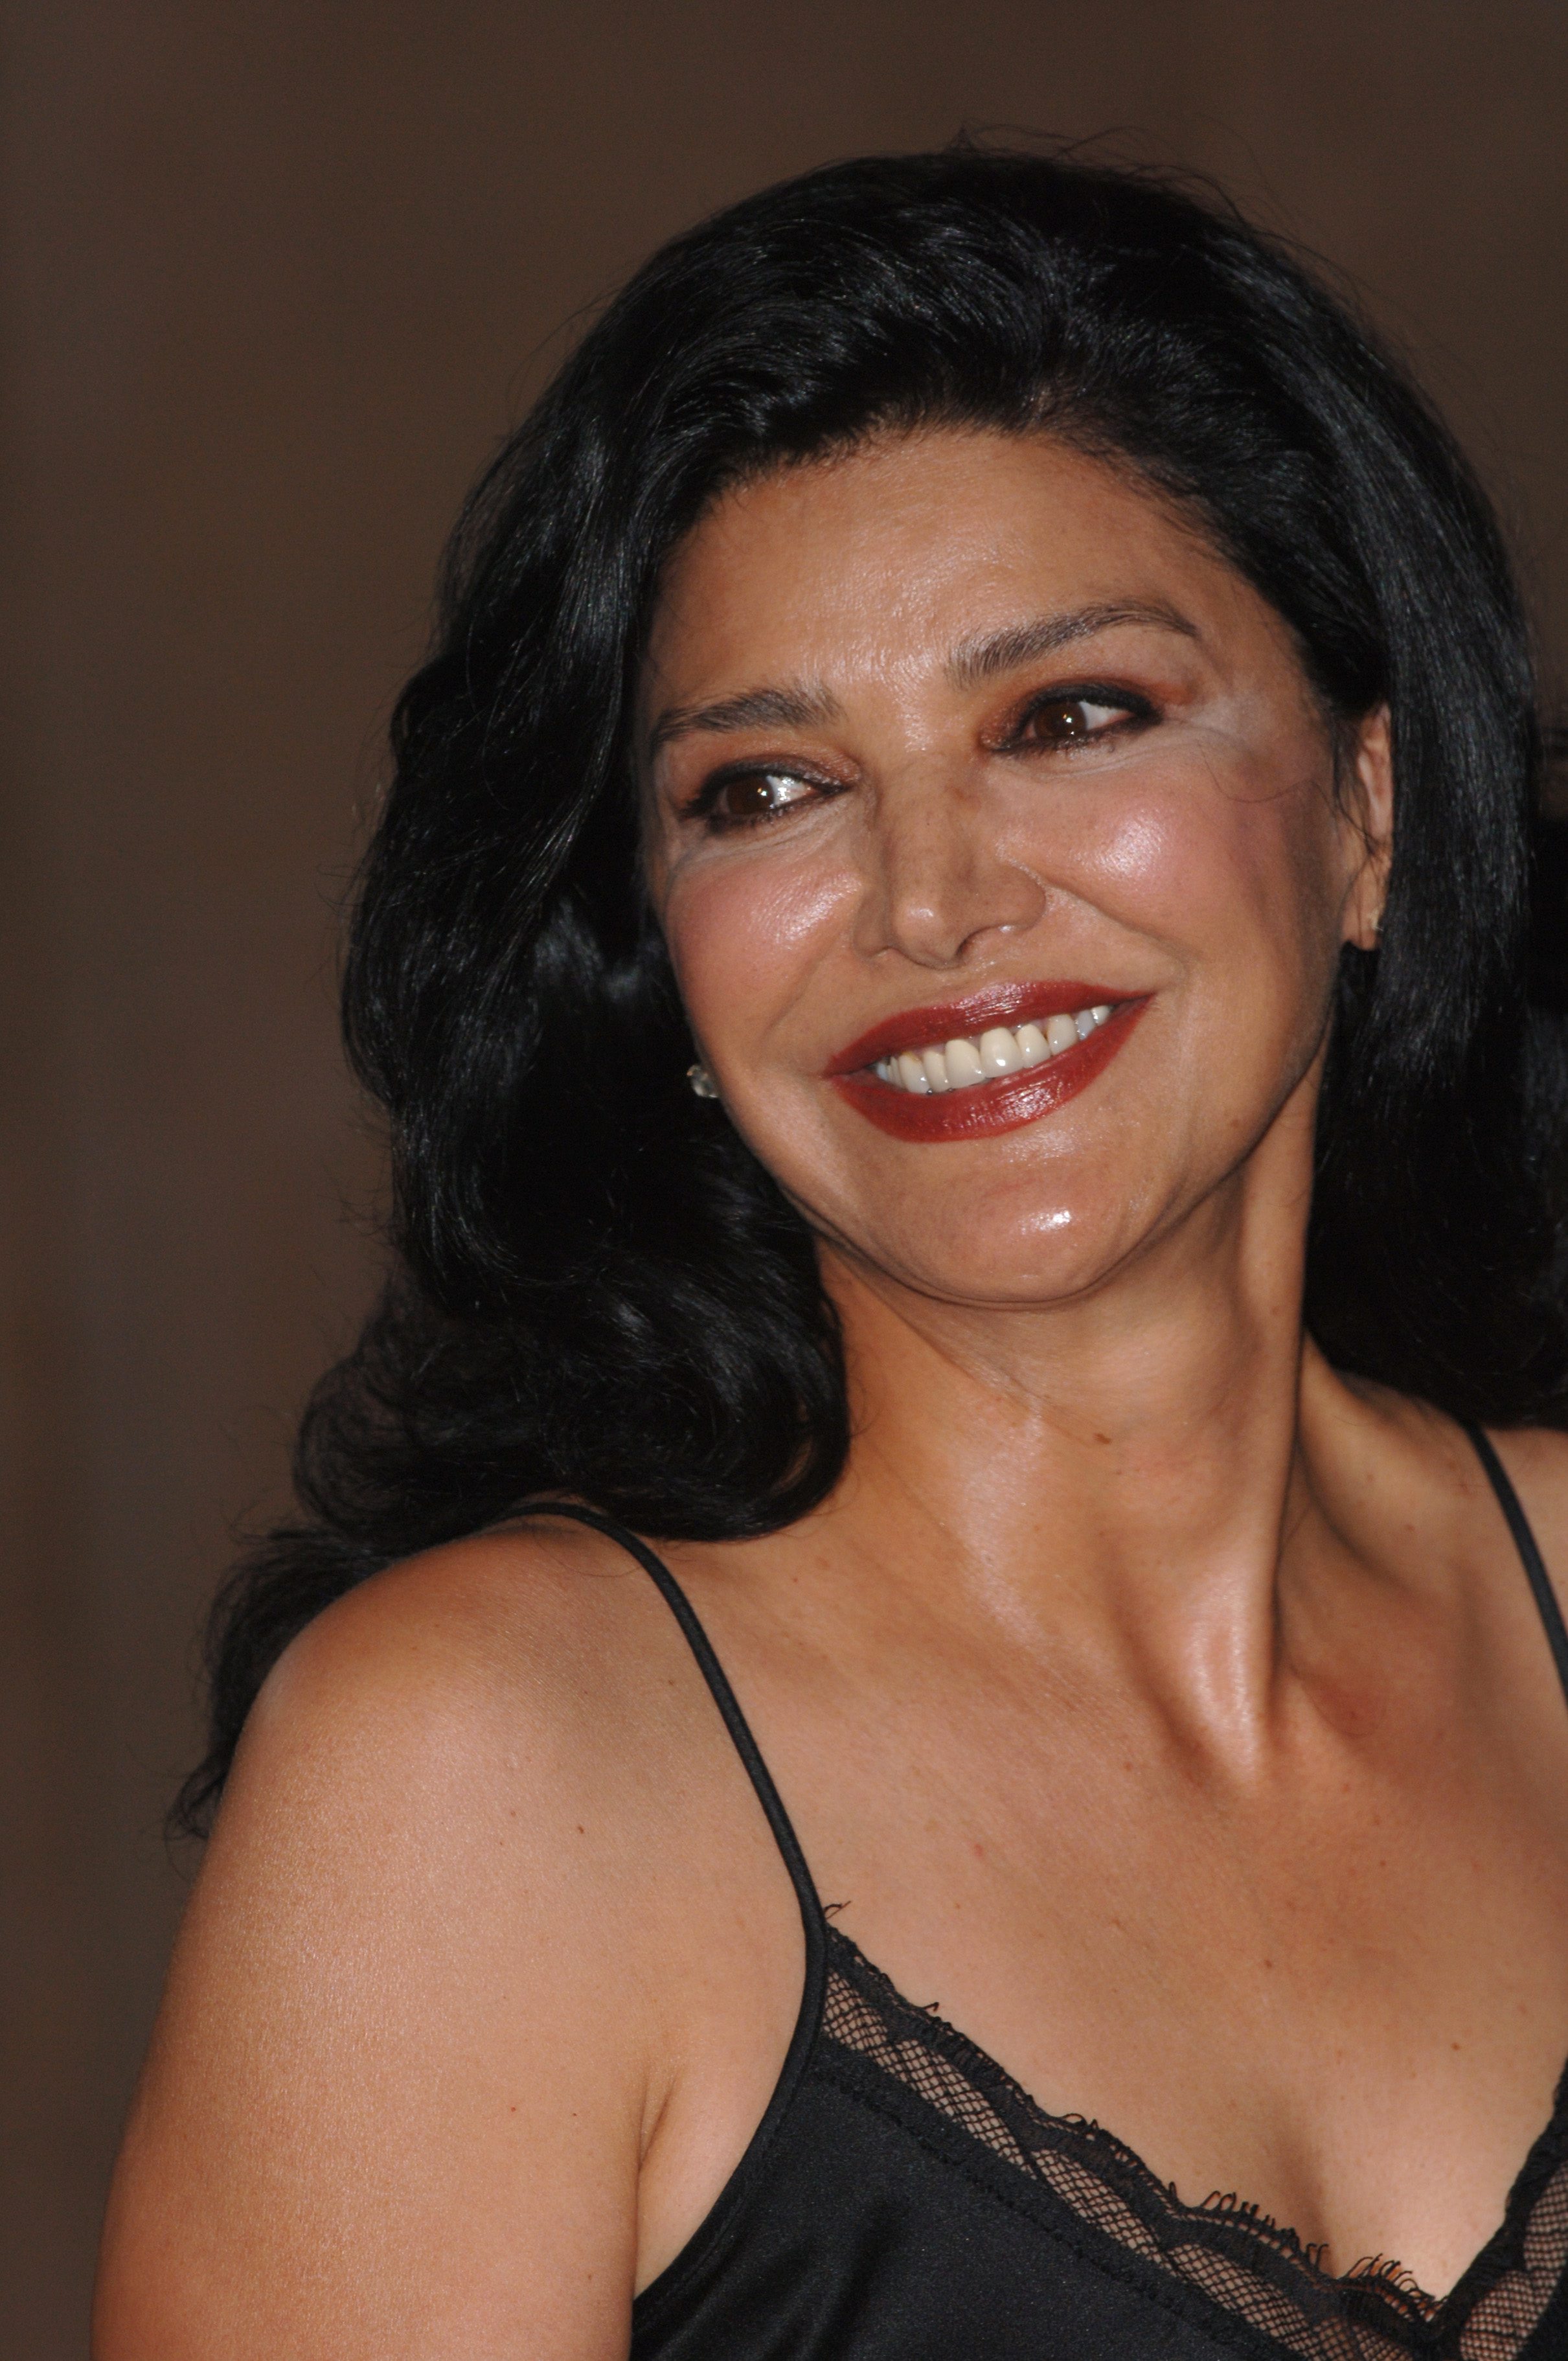 Download this Shohreh Aghdashloo picture